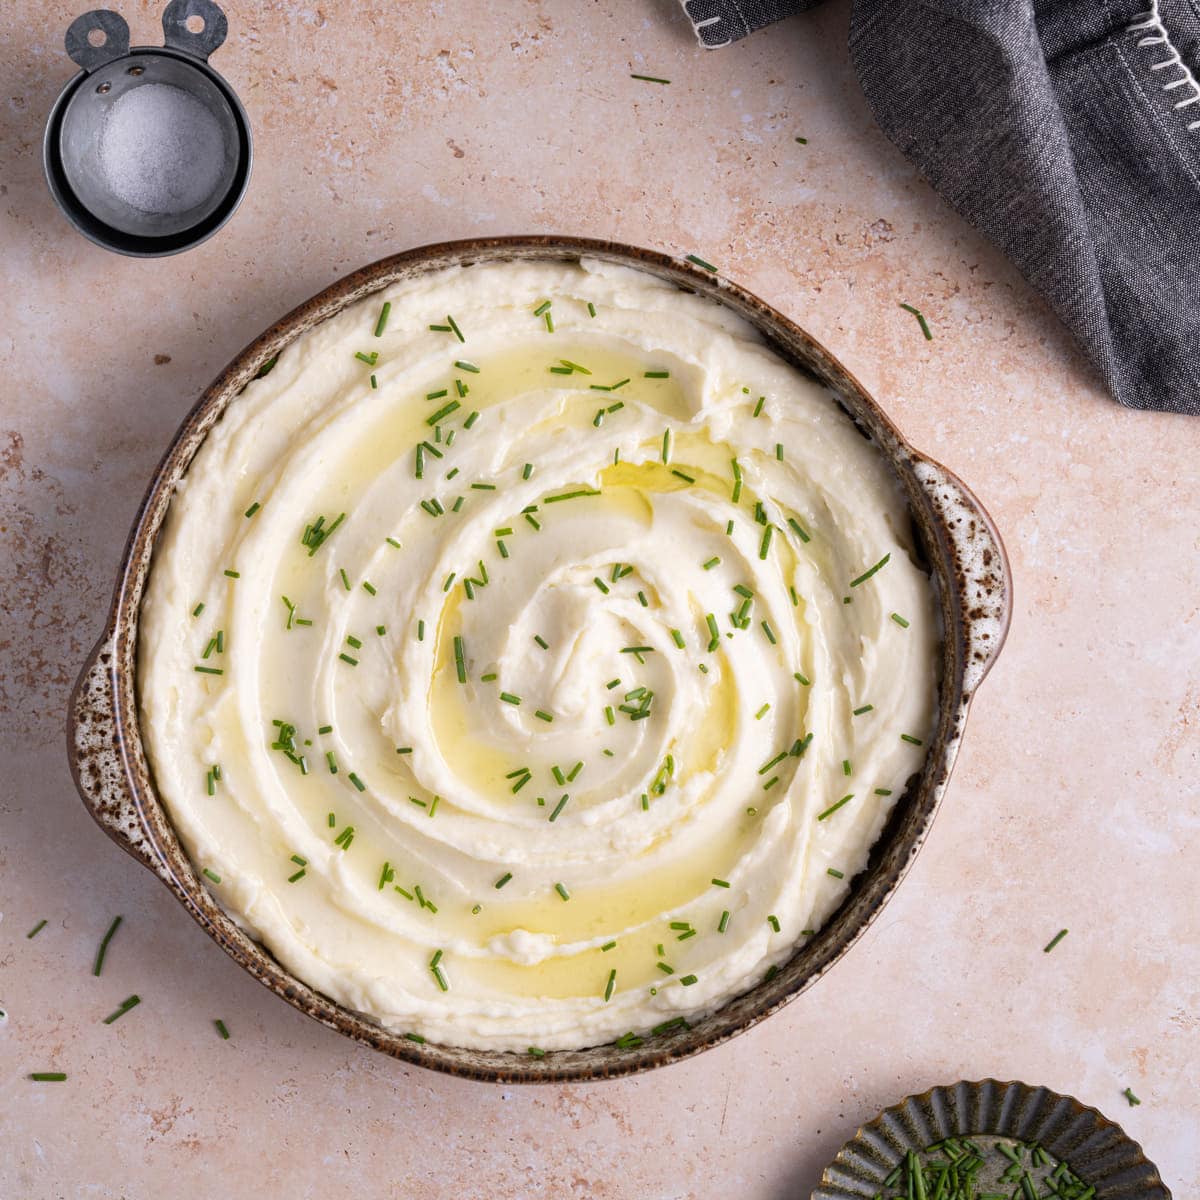 Truffle Mashed Potatoes with Chives